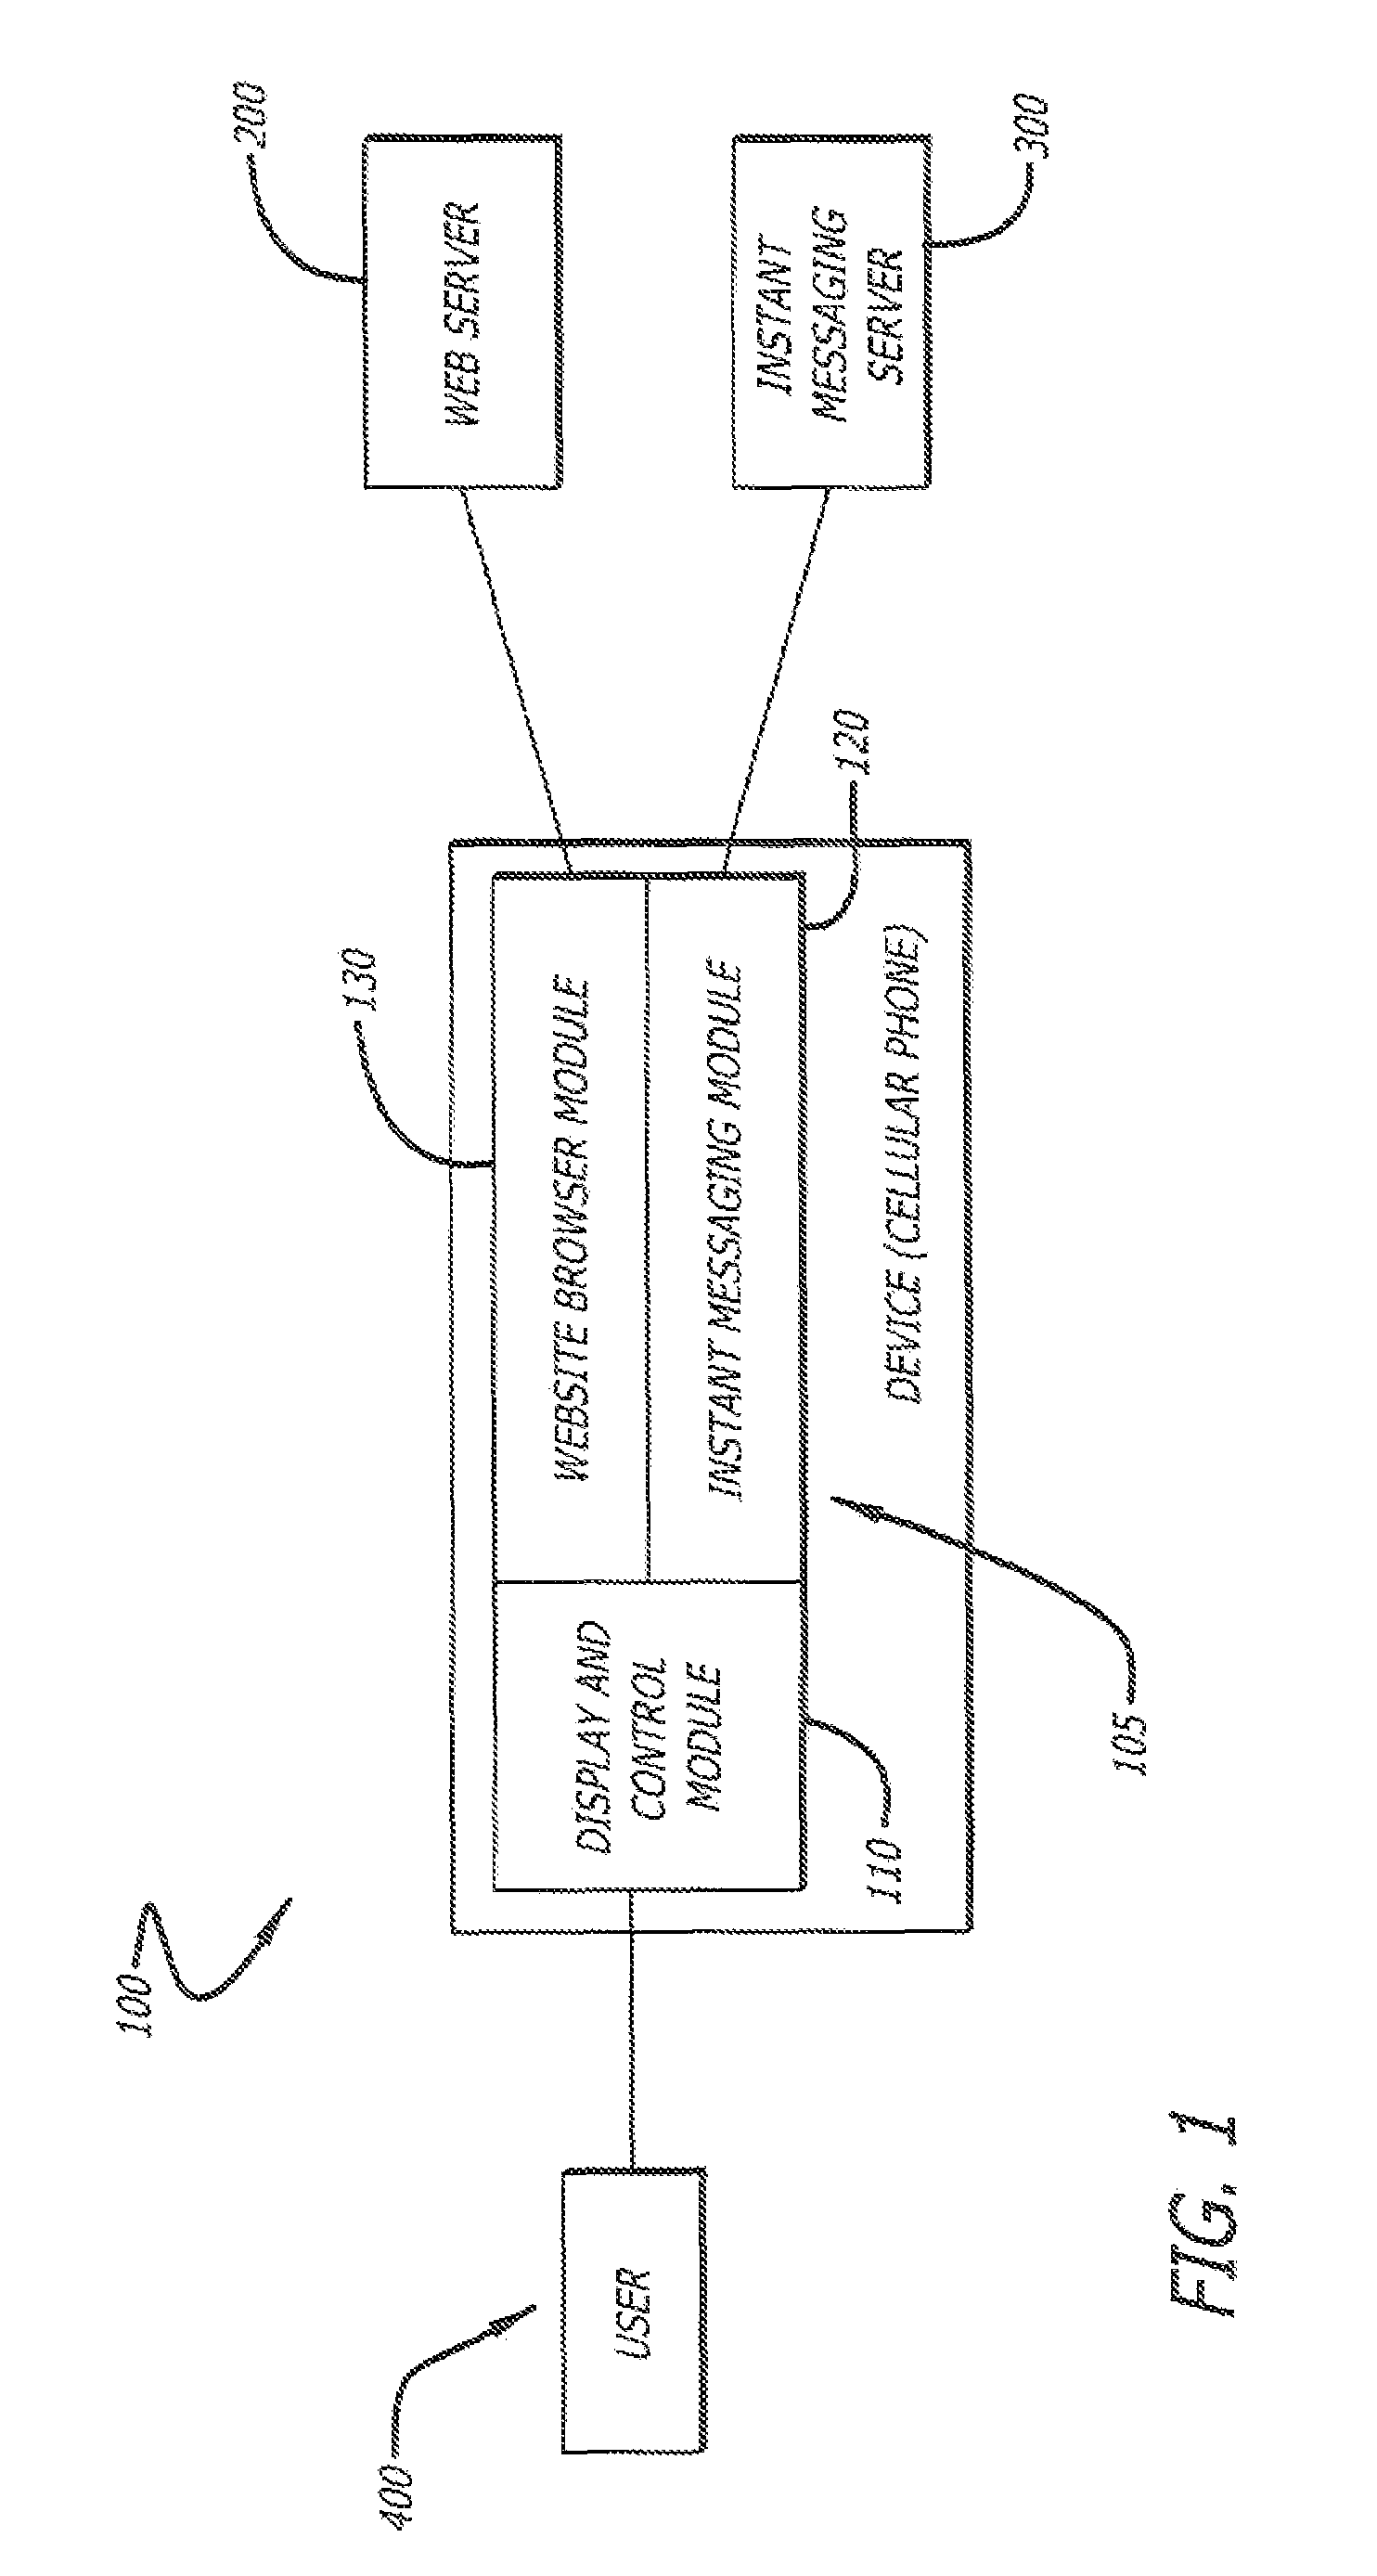 Integrated instant messaging and web browsing client and related methods